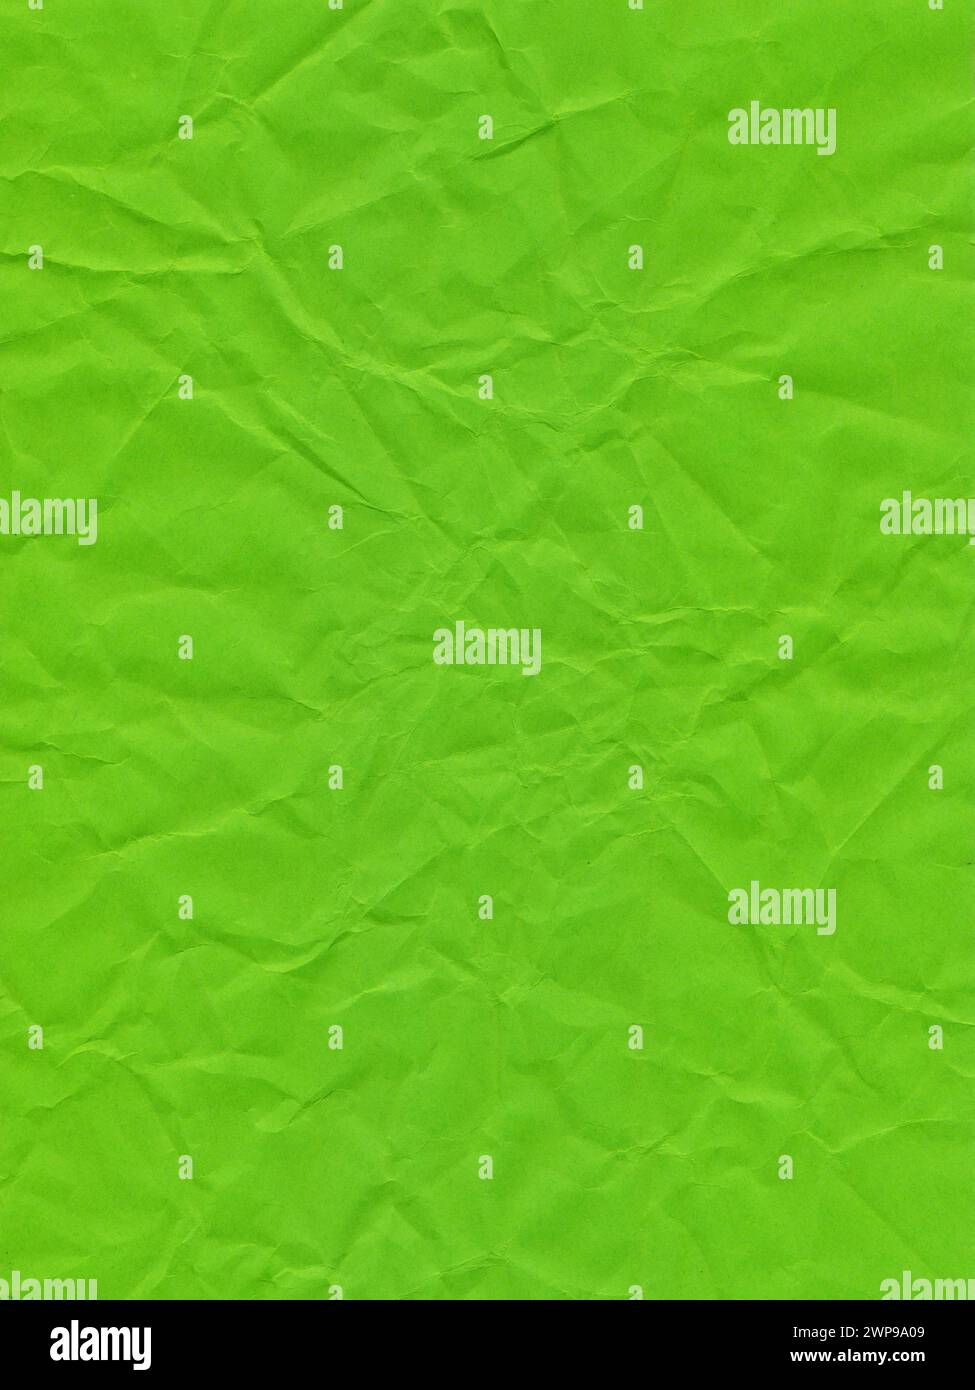 Texture of colored paper, surface of a crumpled light green sheet of paper Stock Photo